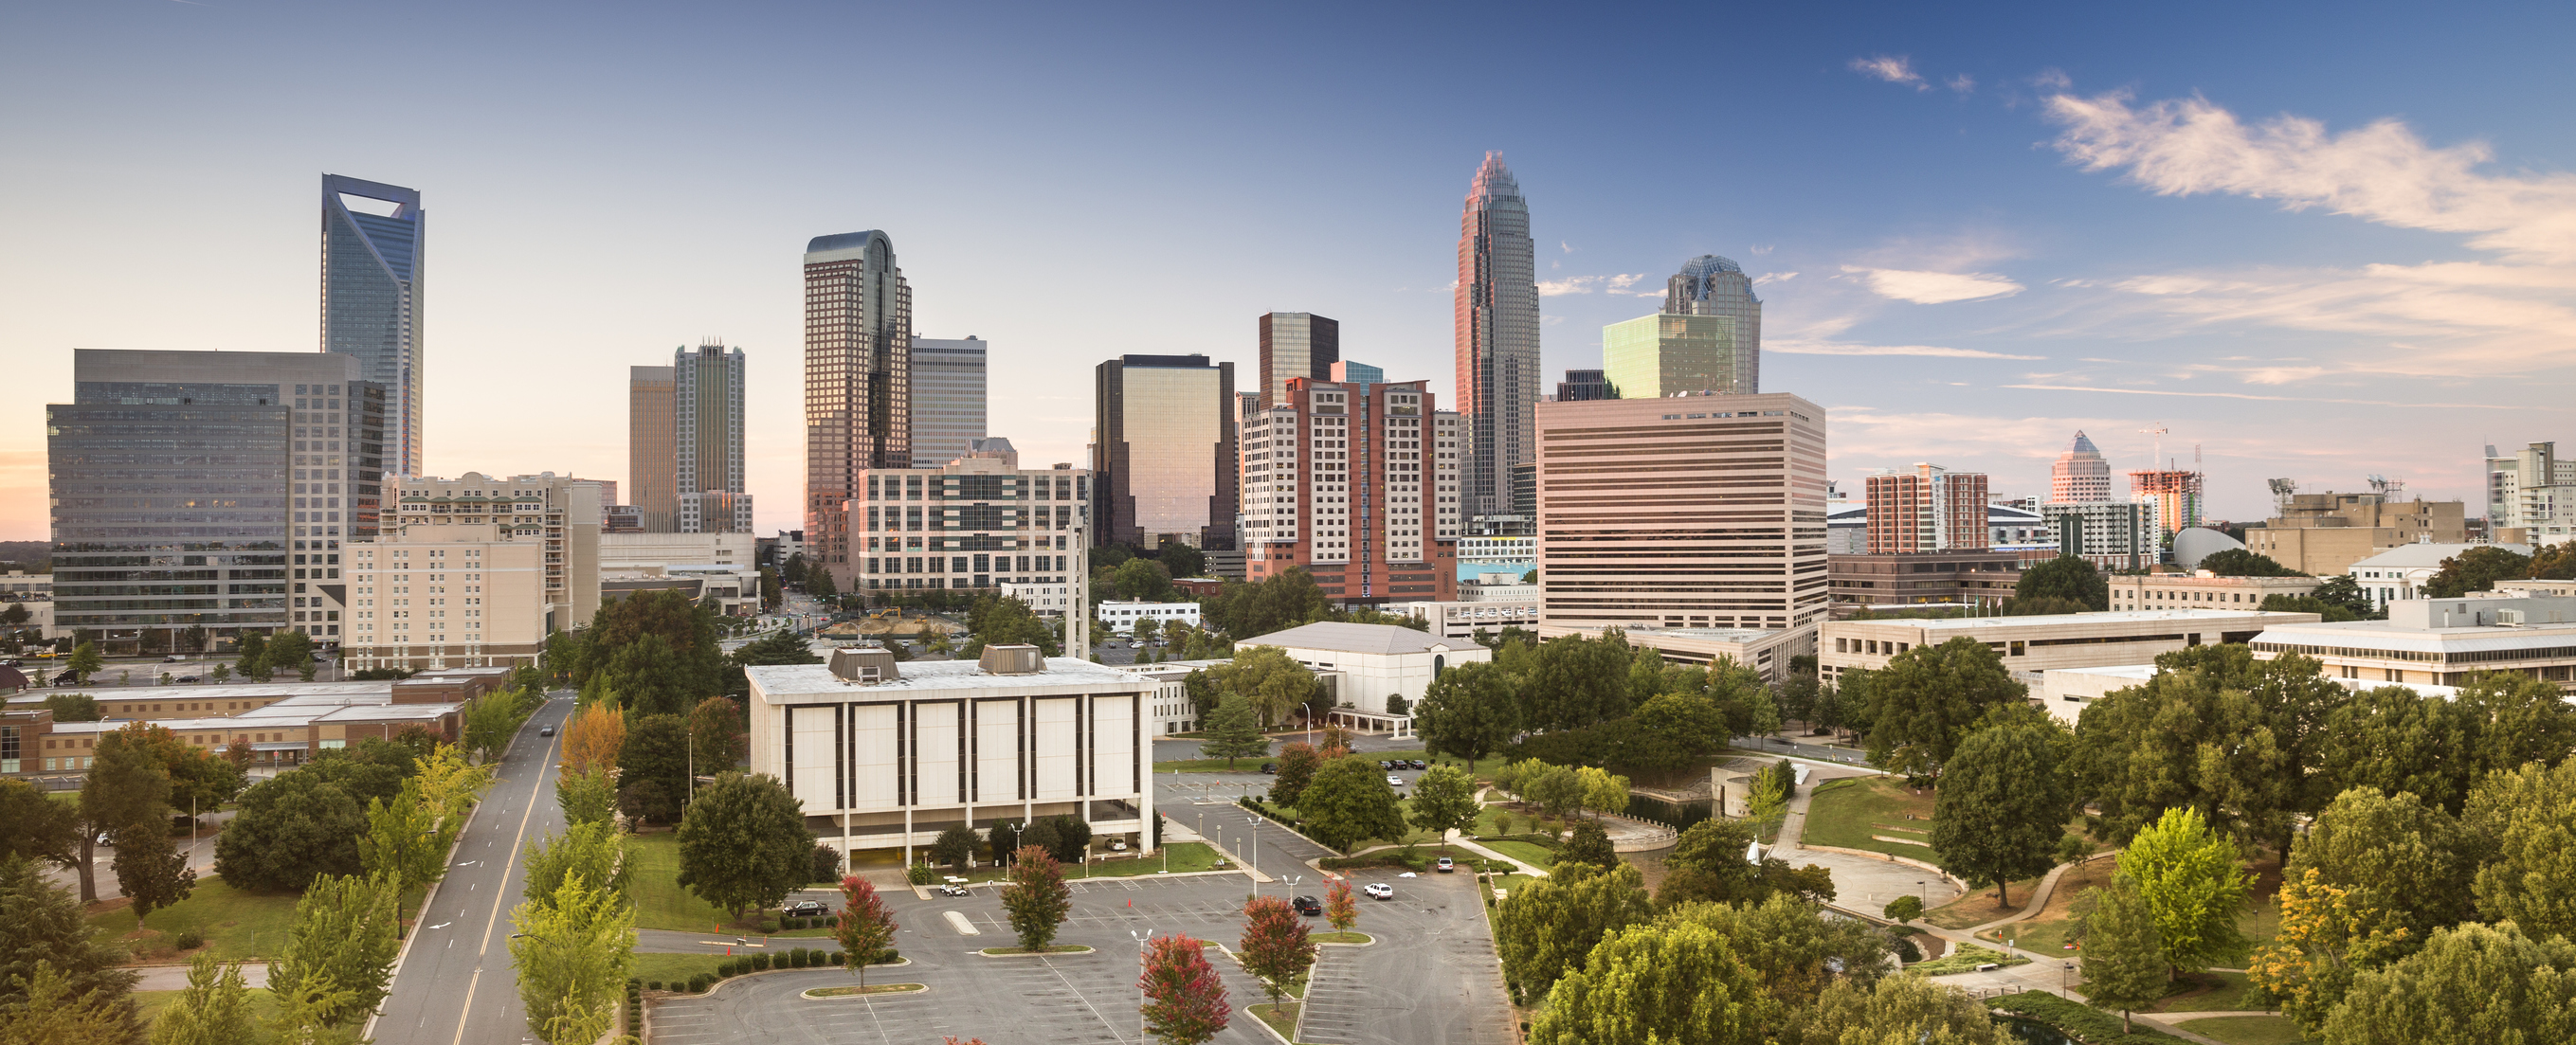 Worley Reporting | Charlotte NC Court Reporting Services